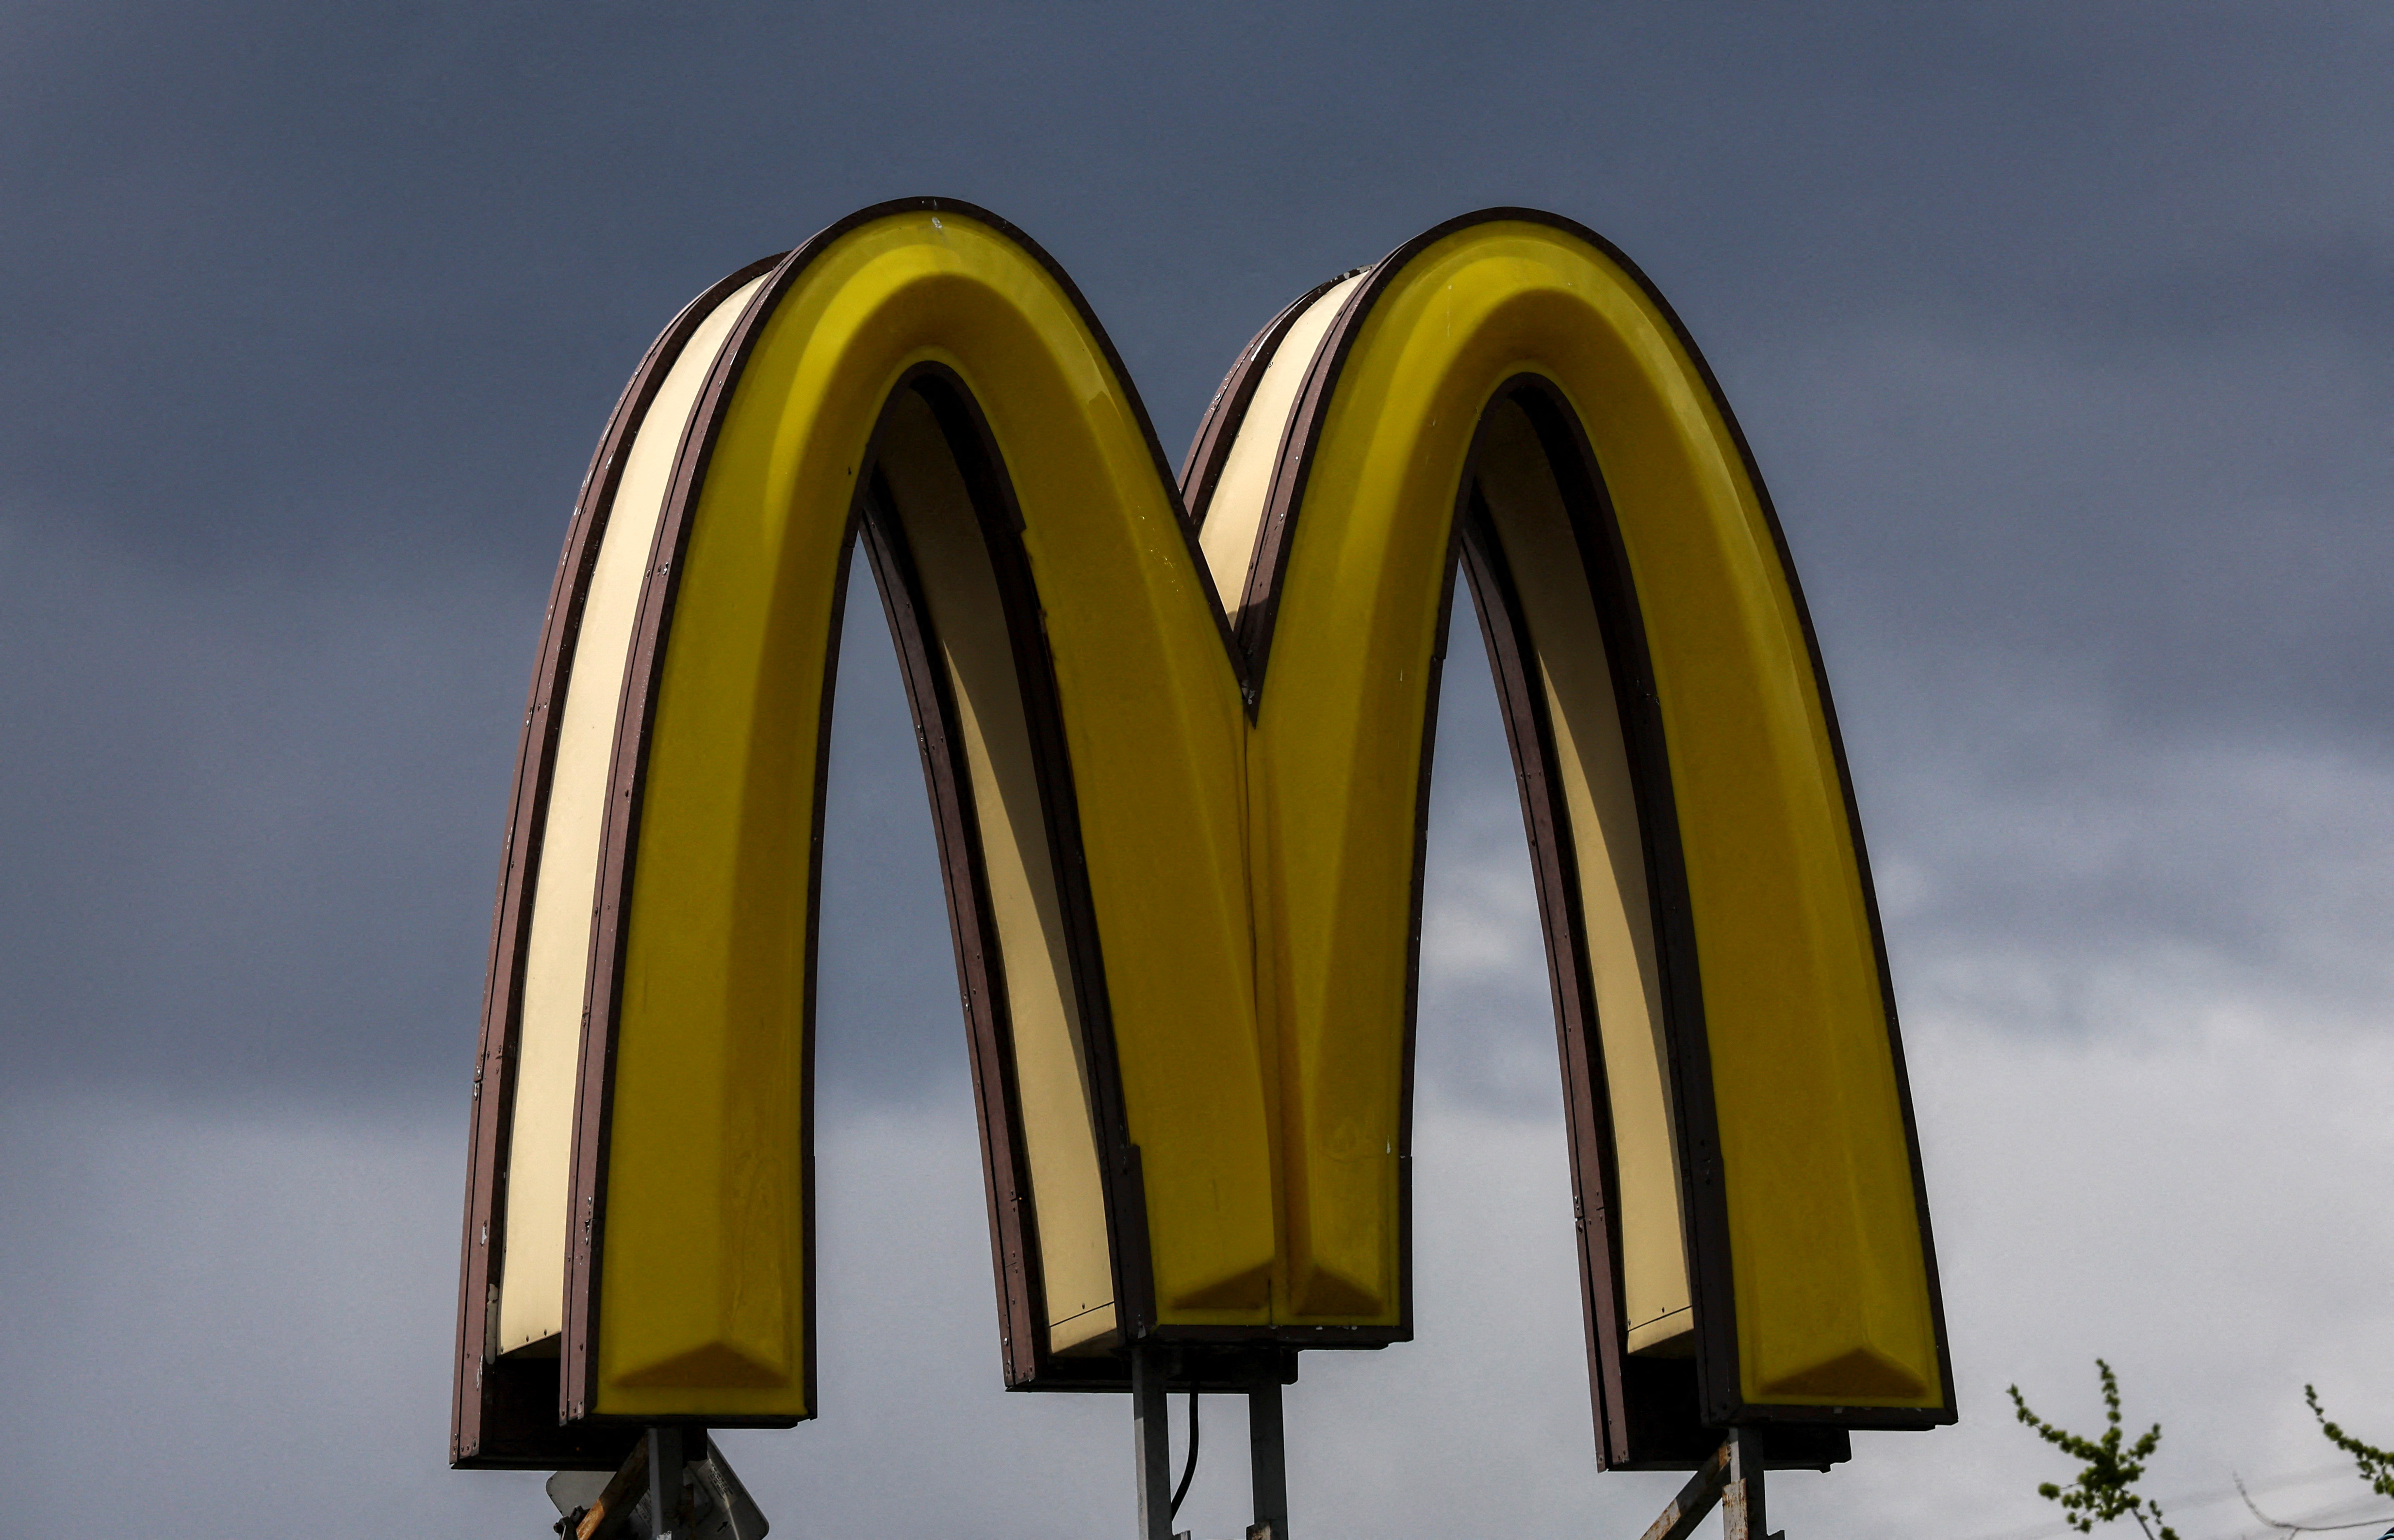 A sign with the logo is on display outside a McDonald's restaurant in Moscow